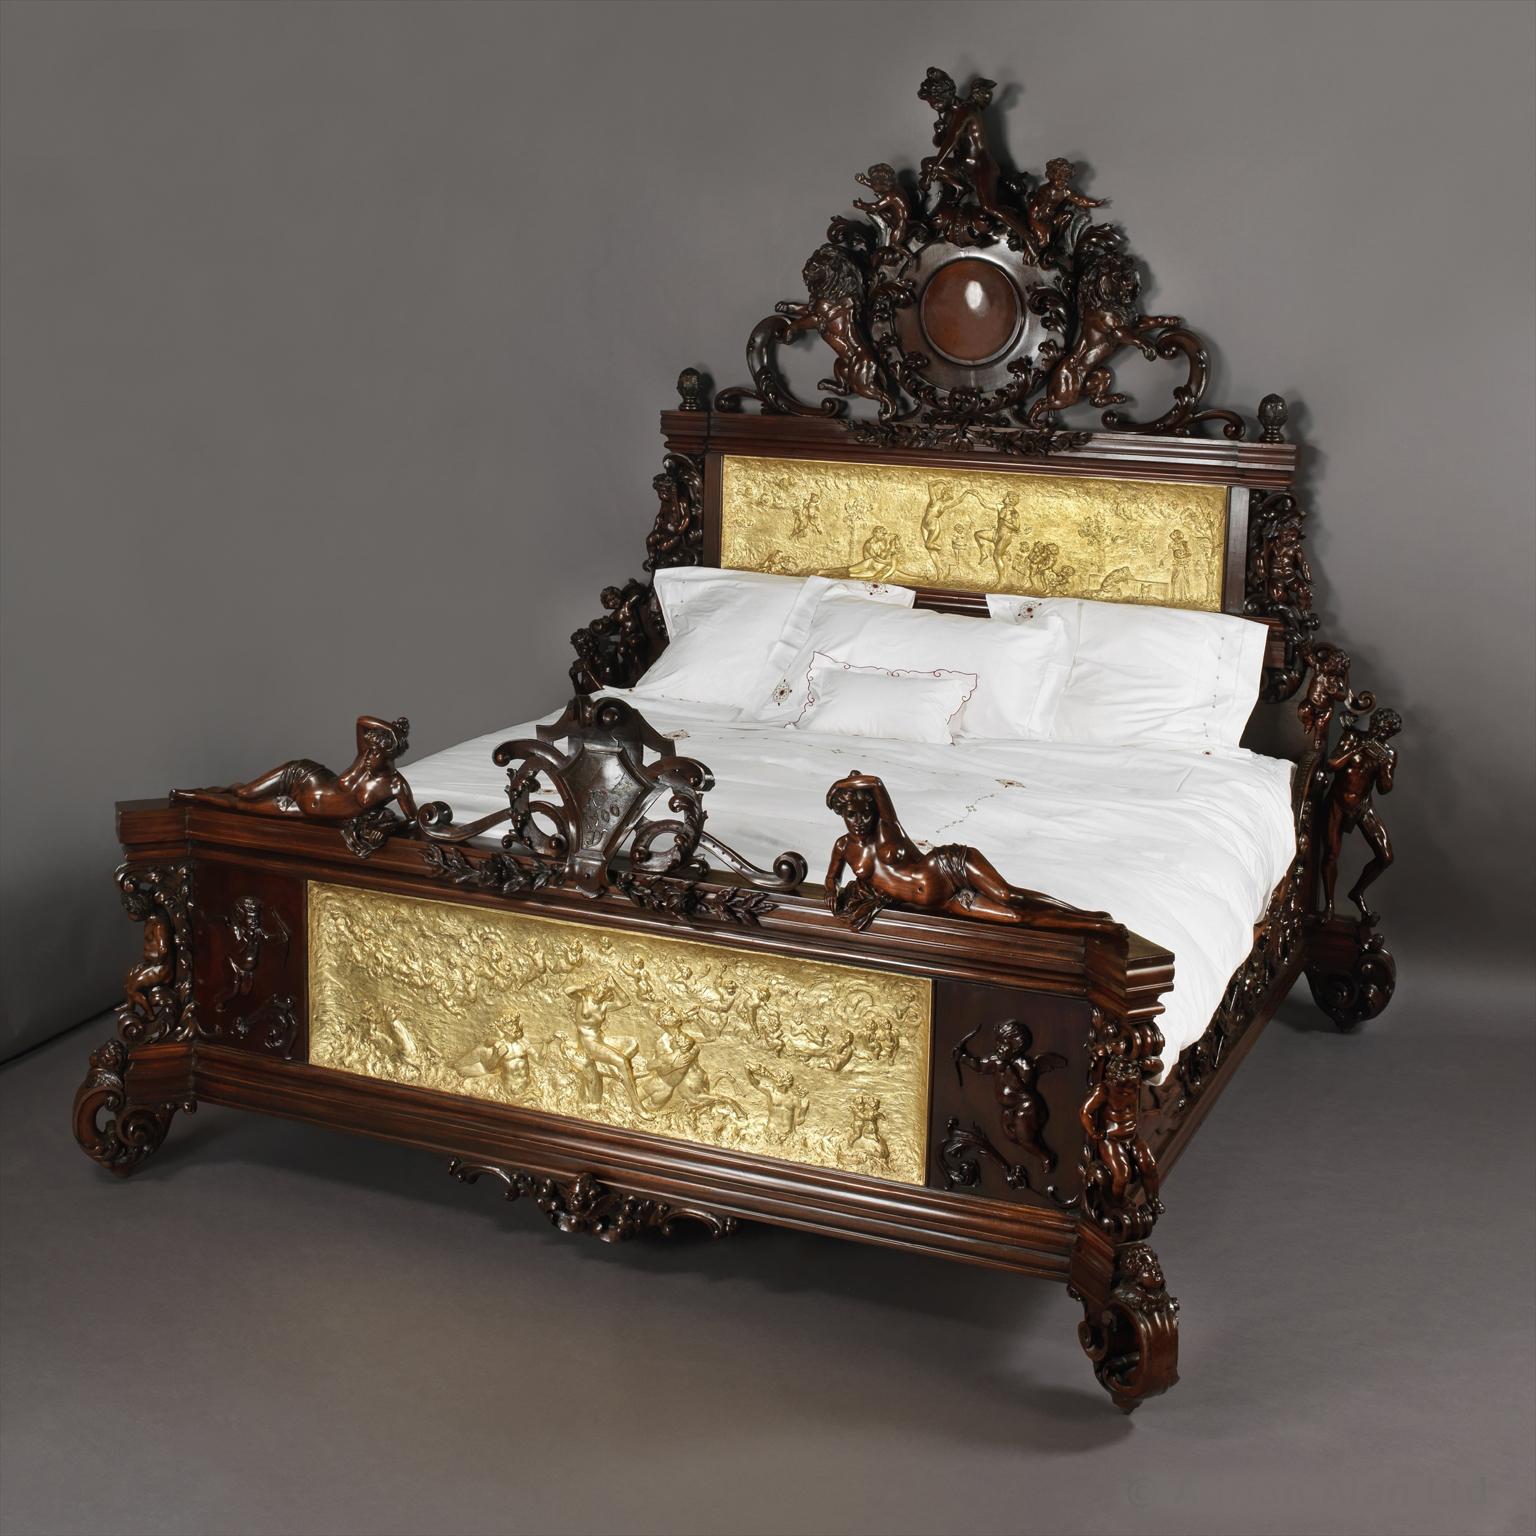 An Exceptional Exhibition Austrian Neo-Baroque Carved Mahogany Bed The Foot and Headboard Finely Carved With Figural Crests and Inset with Gilt-Bronze Relief Panels Depicting the Five Ages of Man and the Birth of Venus.

Austrian, Circa 1890. 

This